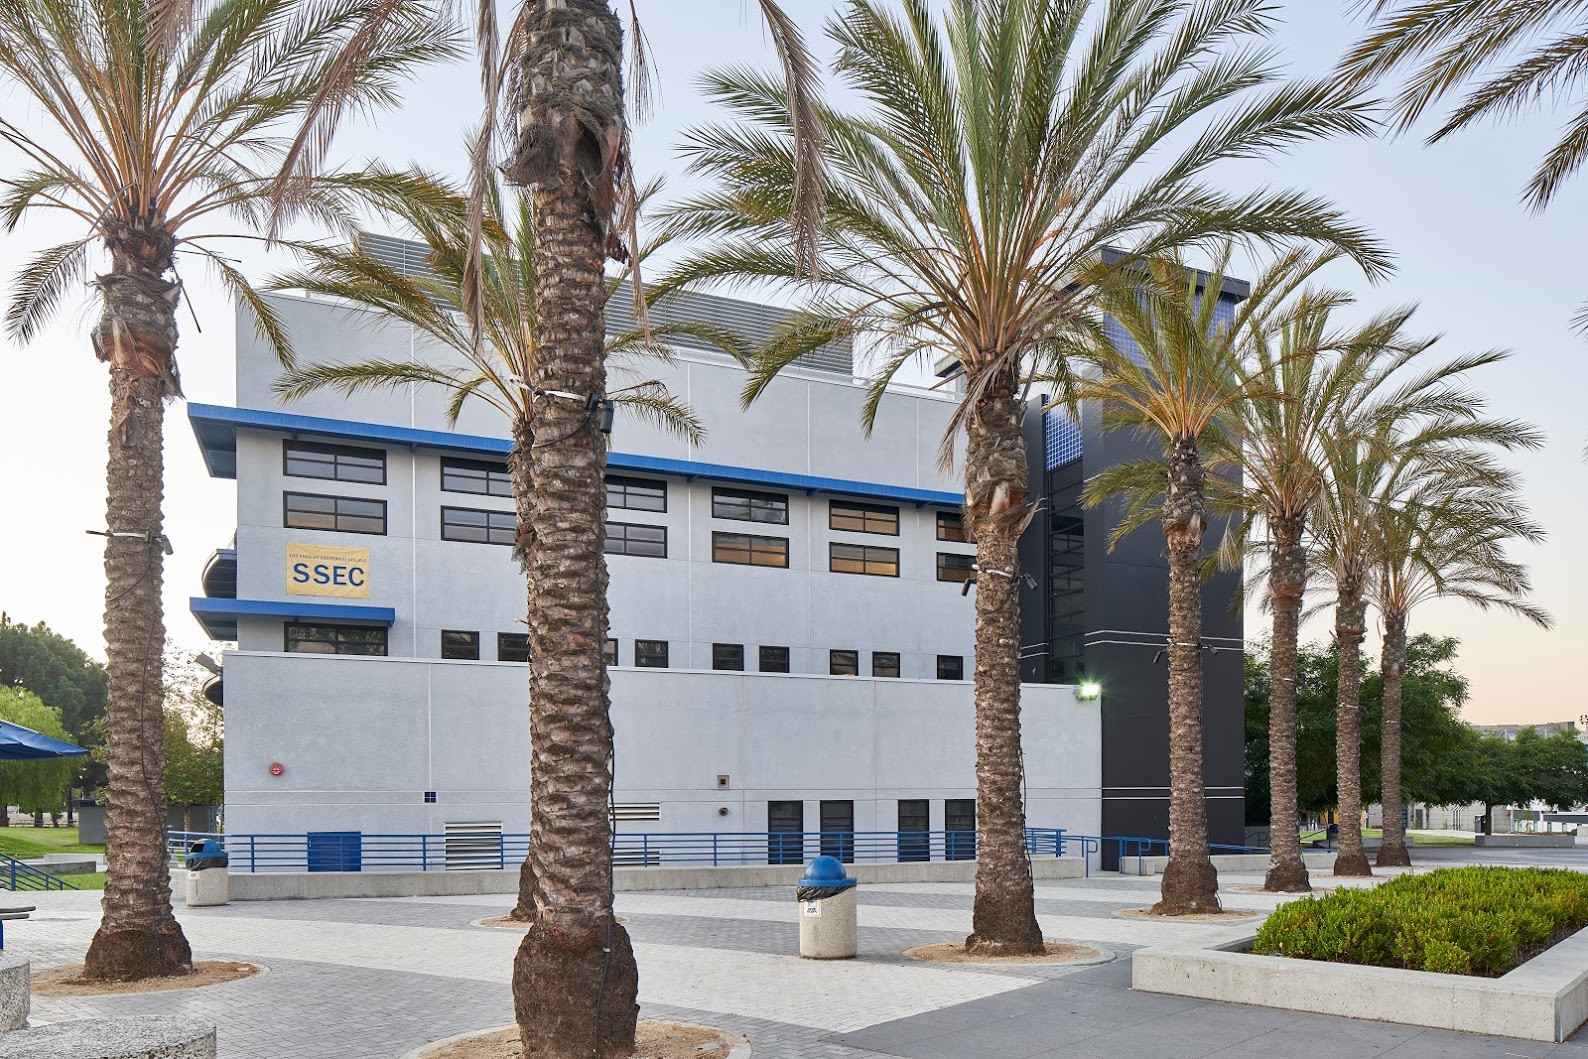 Campus Building Behind Palm Trees